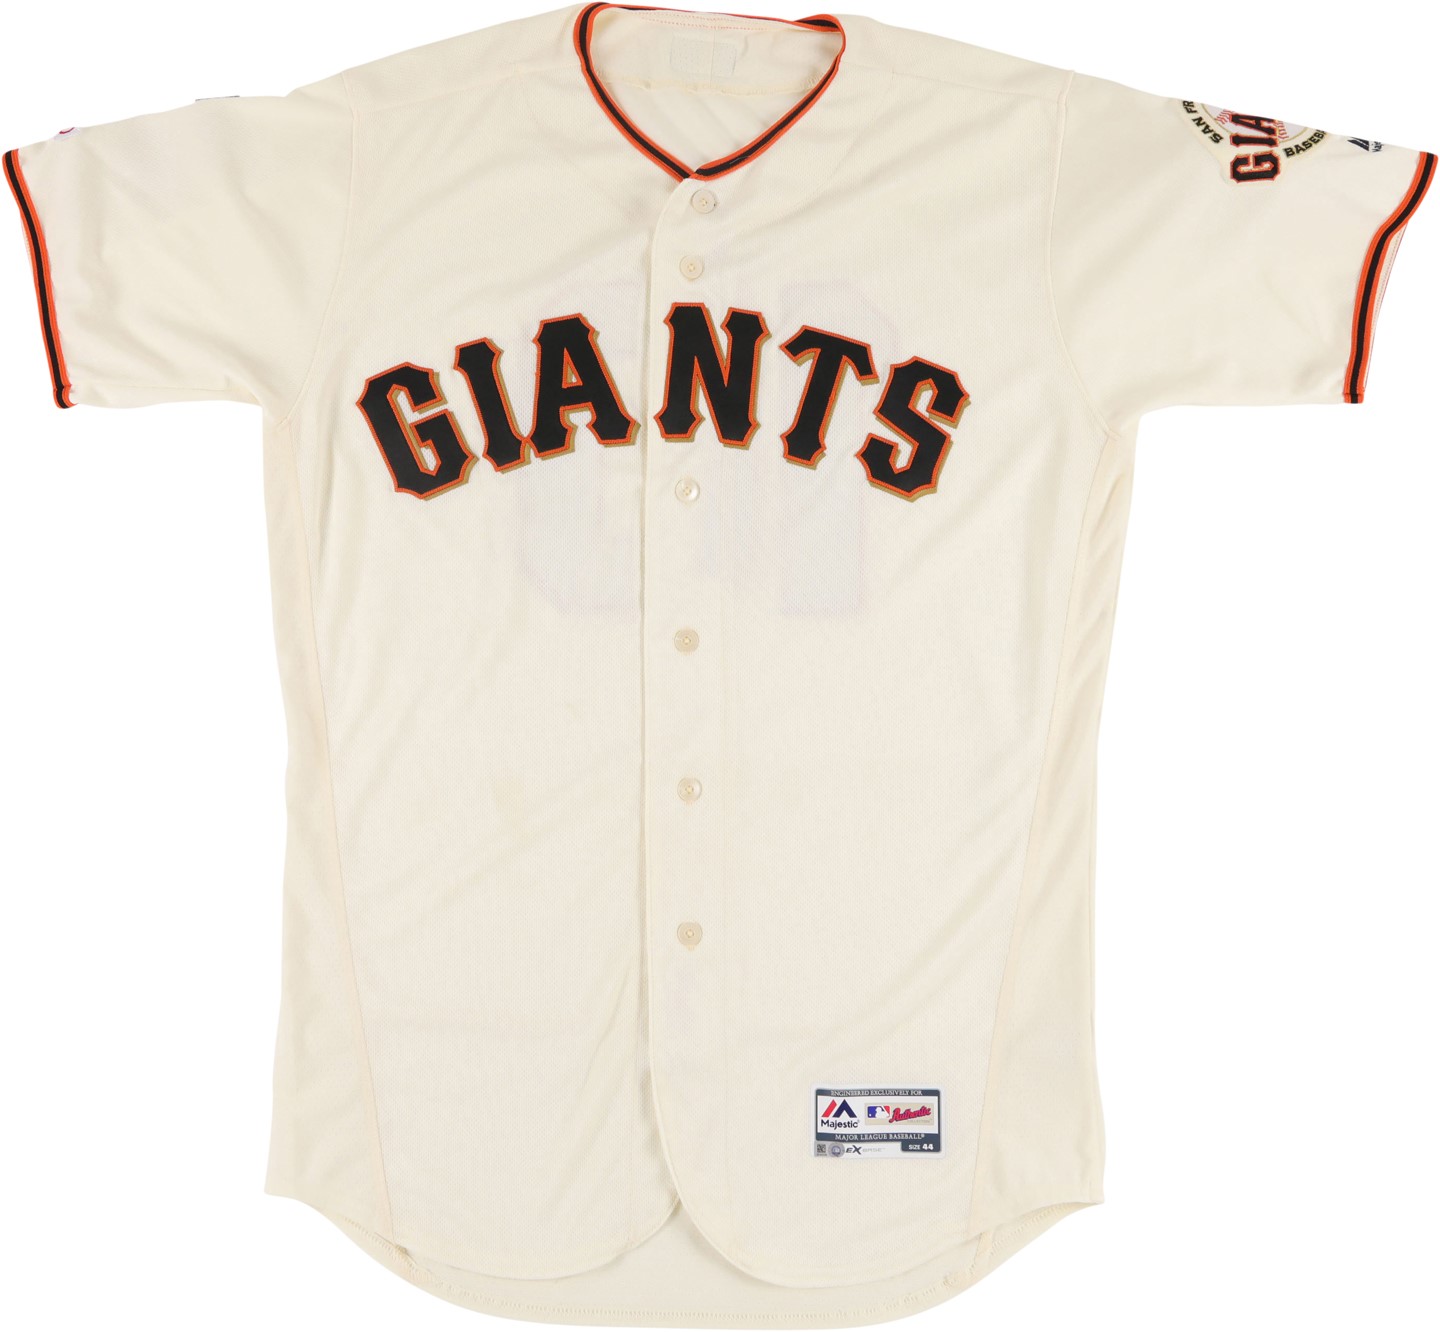 5/1/19 Evan Longoria San Francisco Giants Signed Game Worn Jersey with Four Patches (MLB Holo & Photo-Matched)